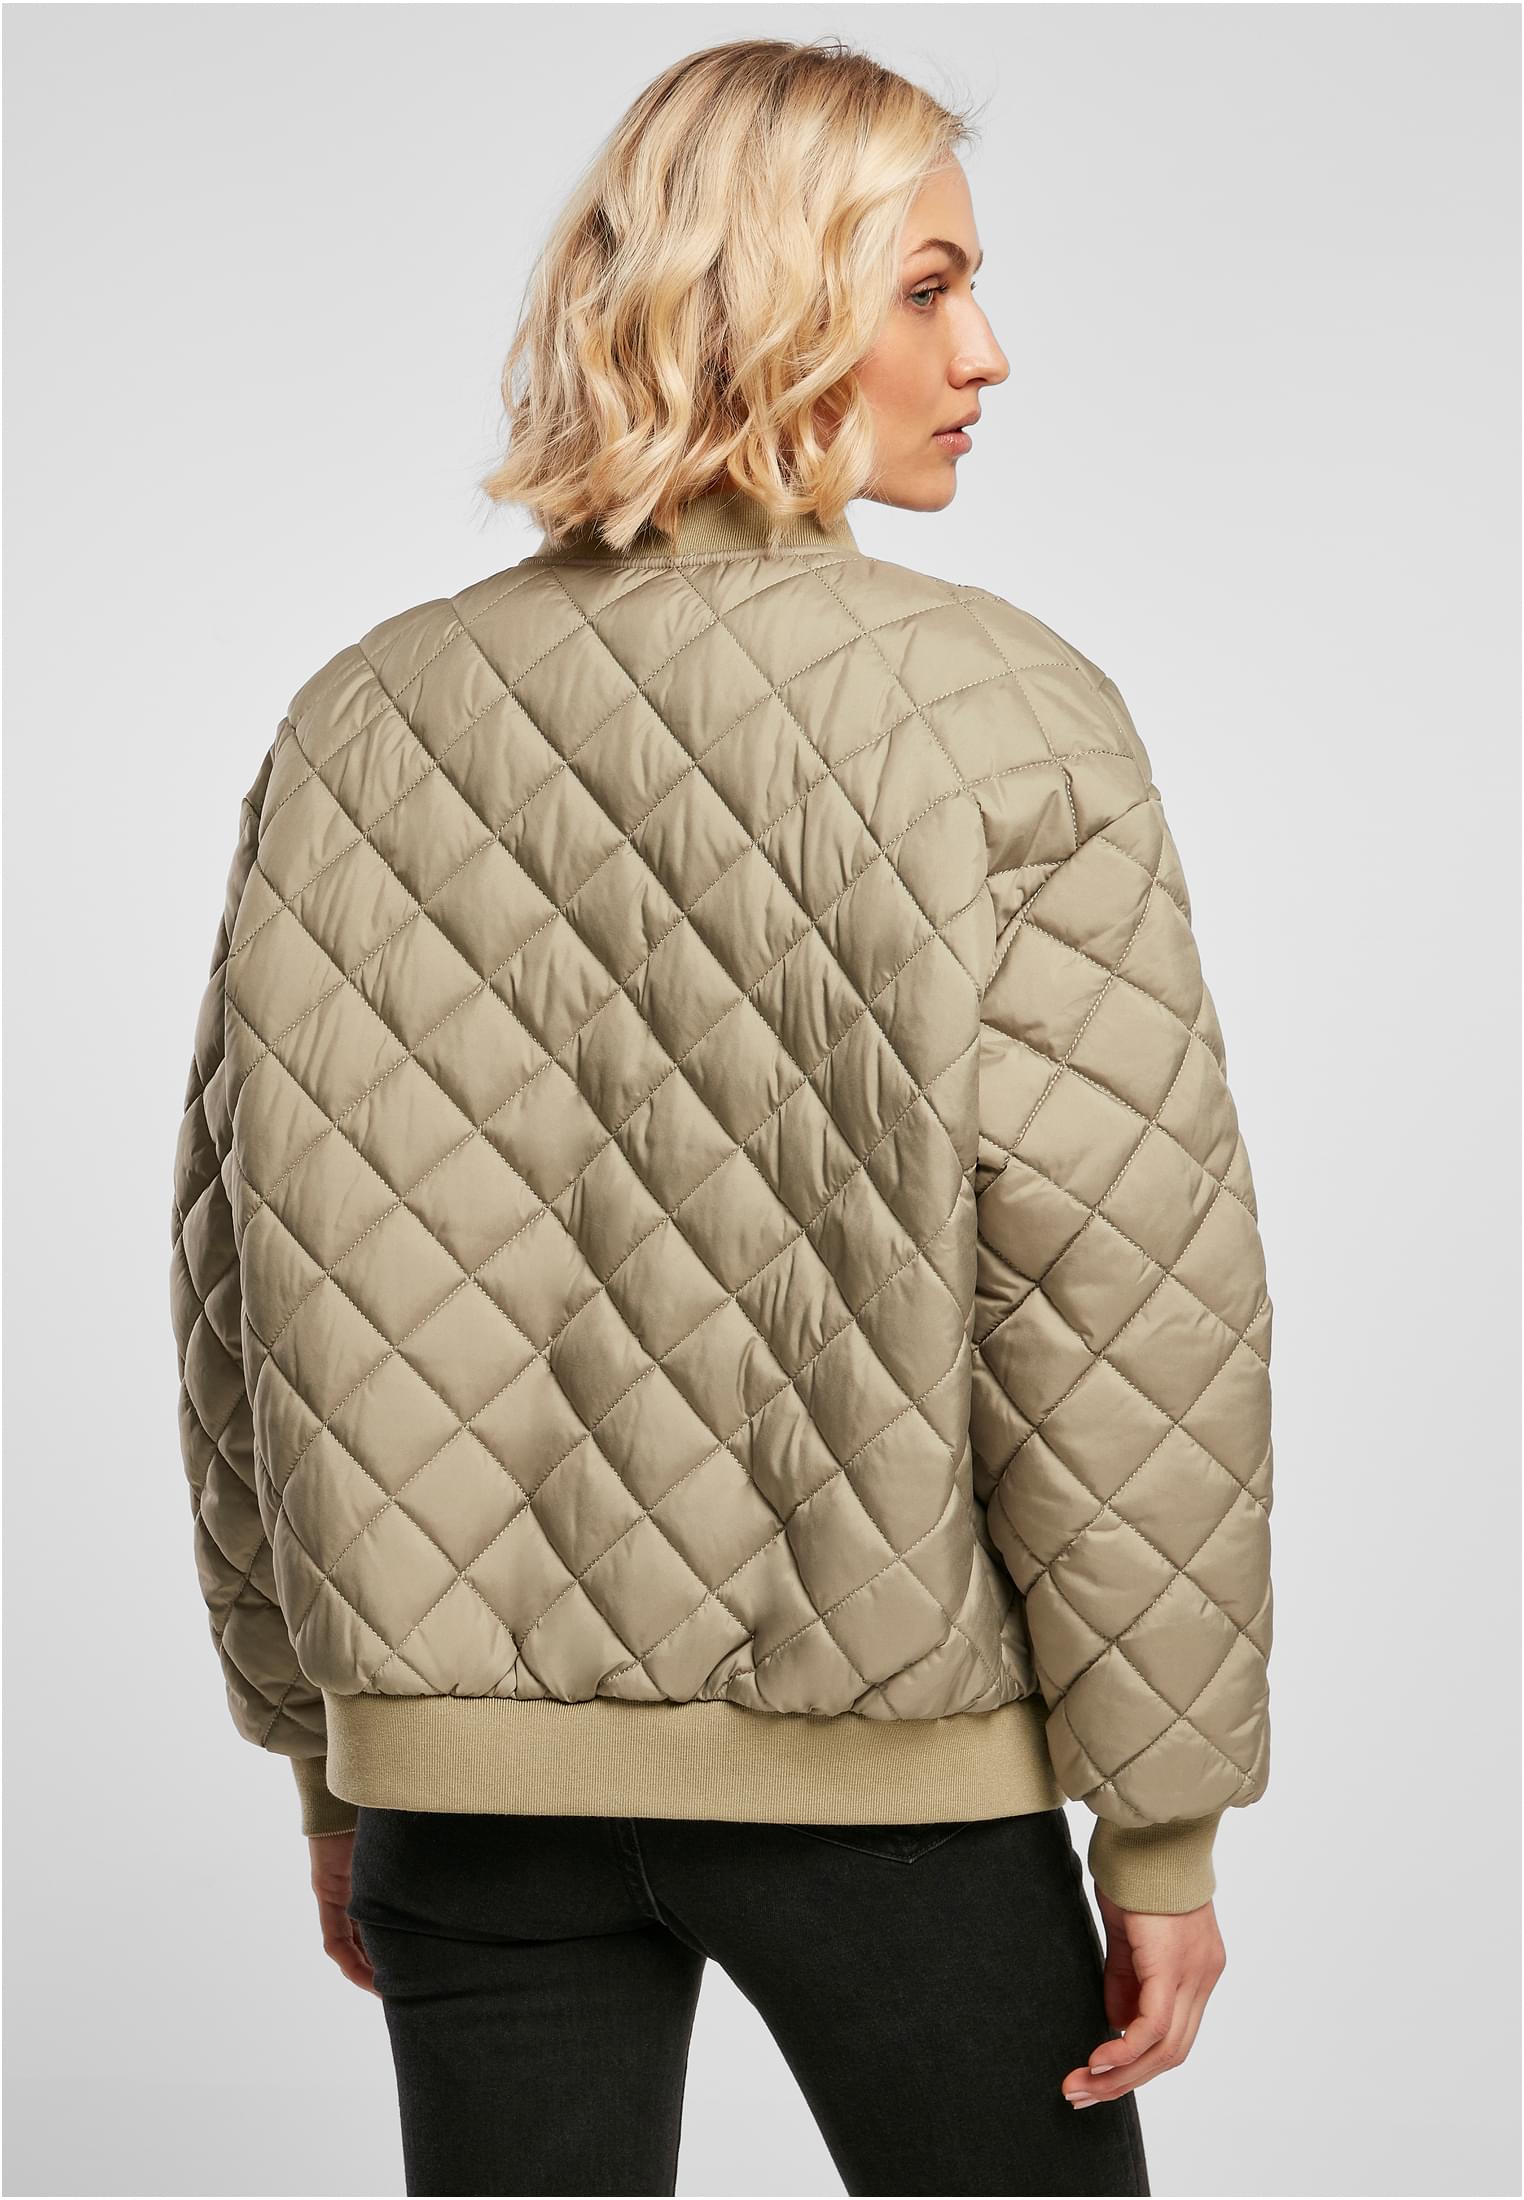 Roundtree & Yorke Matte Diamond Quilted Bomber Jacket